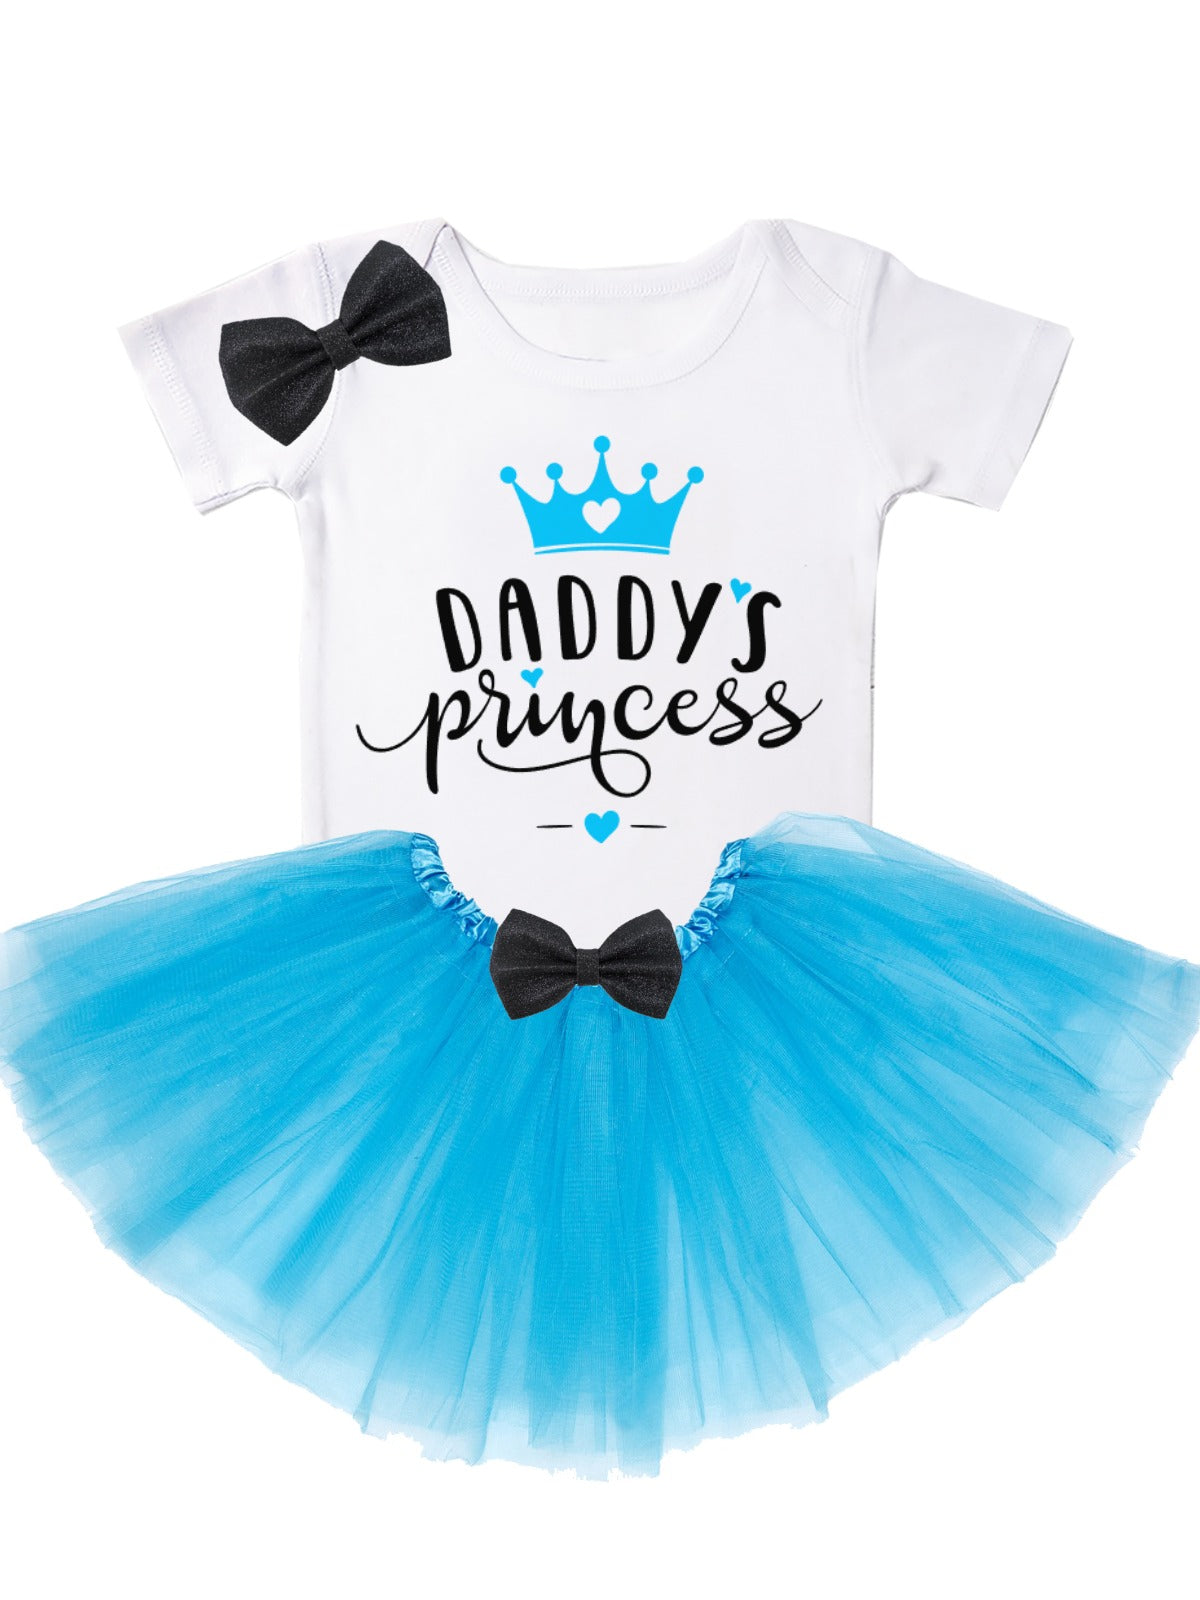 Daddy's Princess Tutu Outfit in Blue for Father's Day